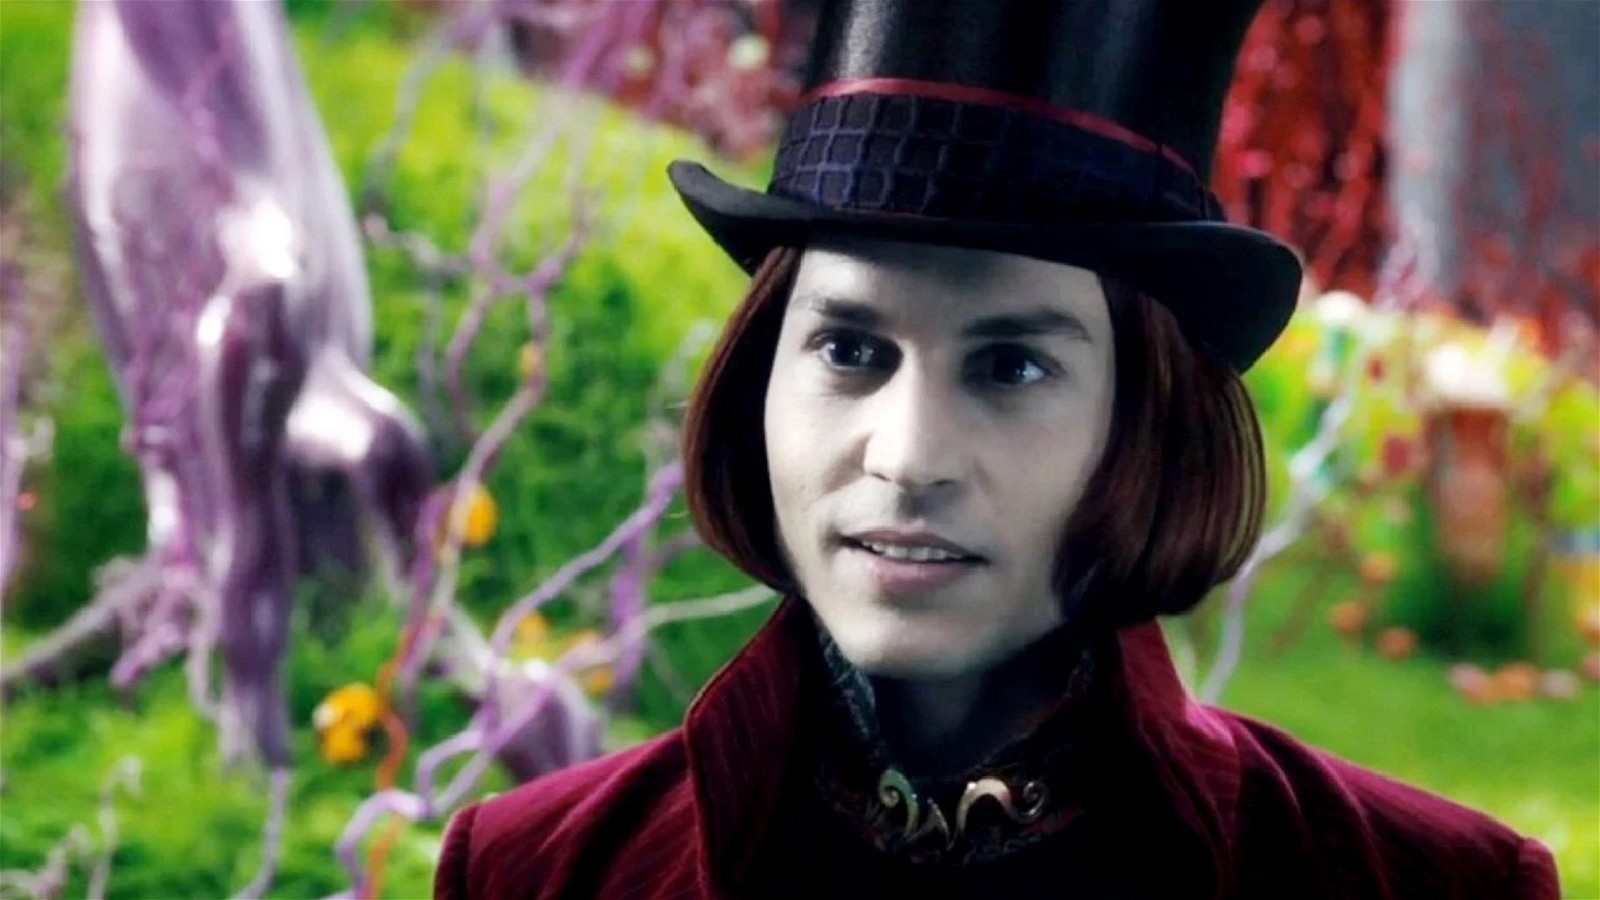 Johnny Depp in Charlie and the Chocolate Factory